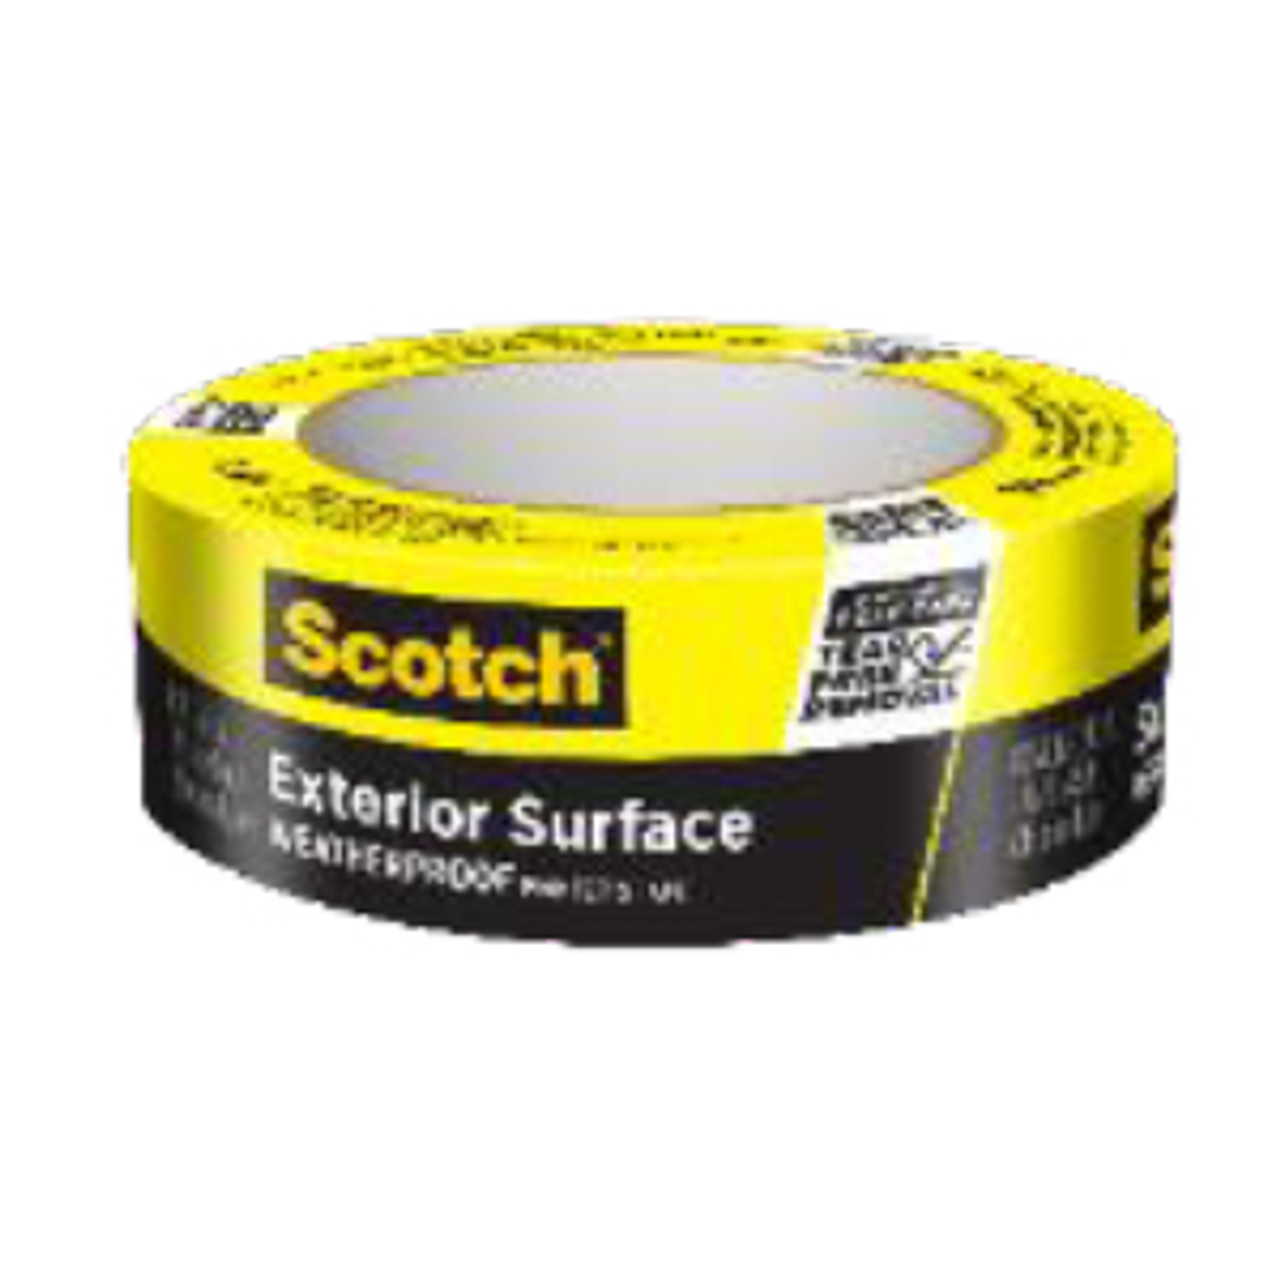 Scotch® Exterior Surface Painter's Tape 2097-48EC-XS, 1.88 in x 45